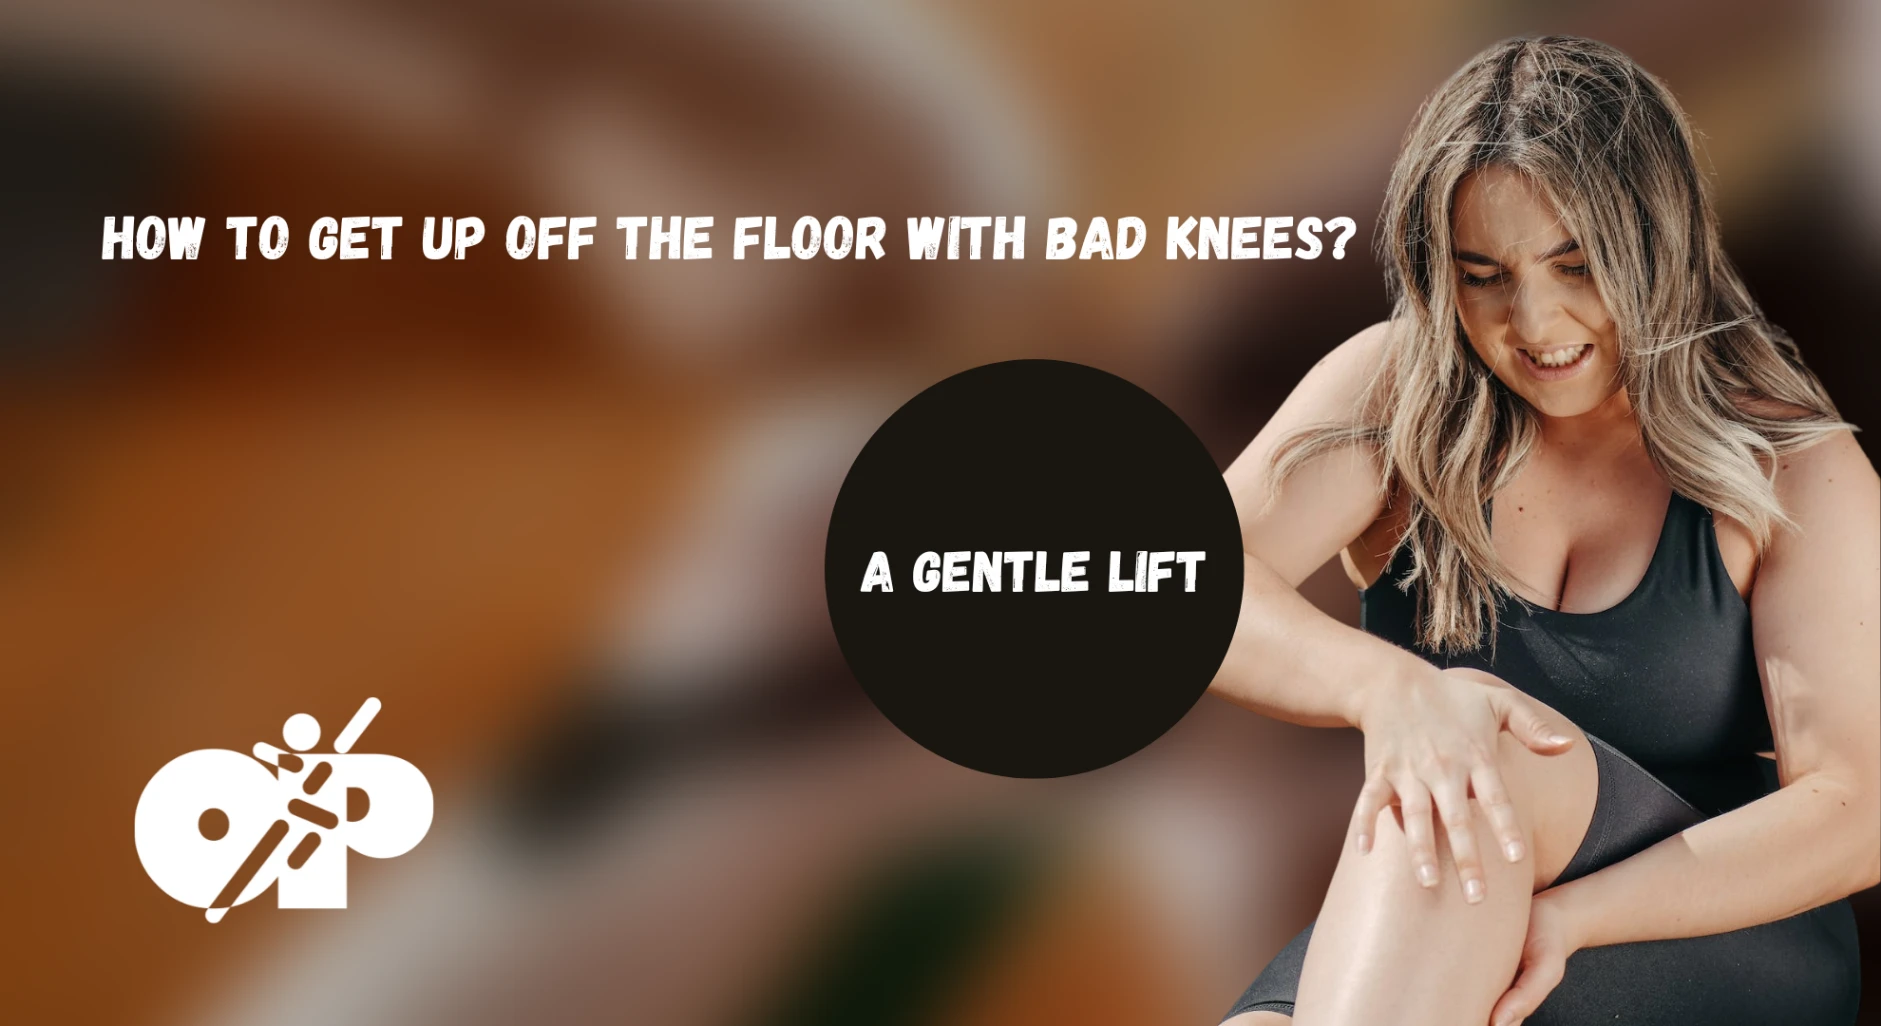 42. How to Get Up Off the Floor with Bad Knees A Gentle Lift